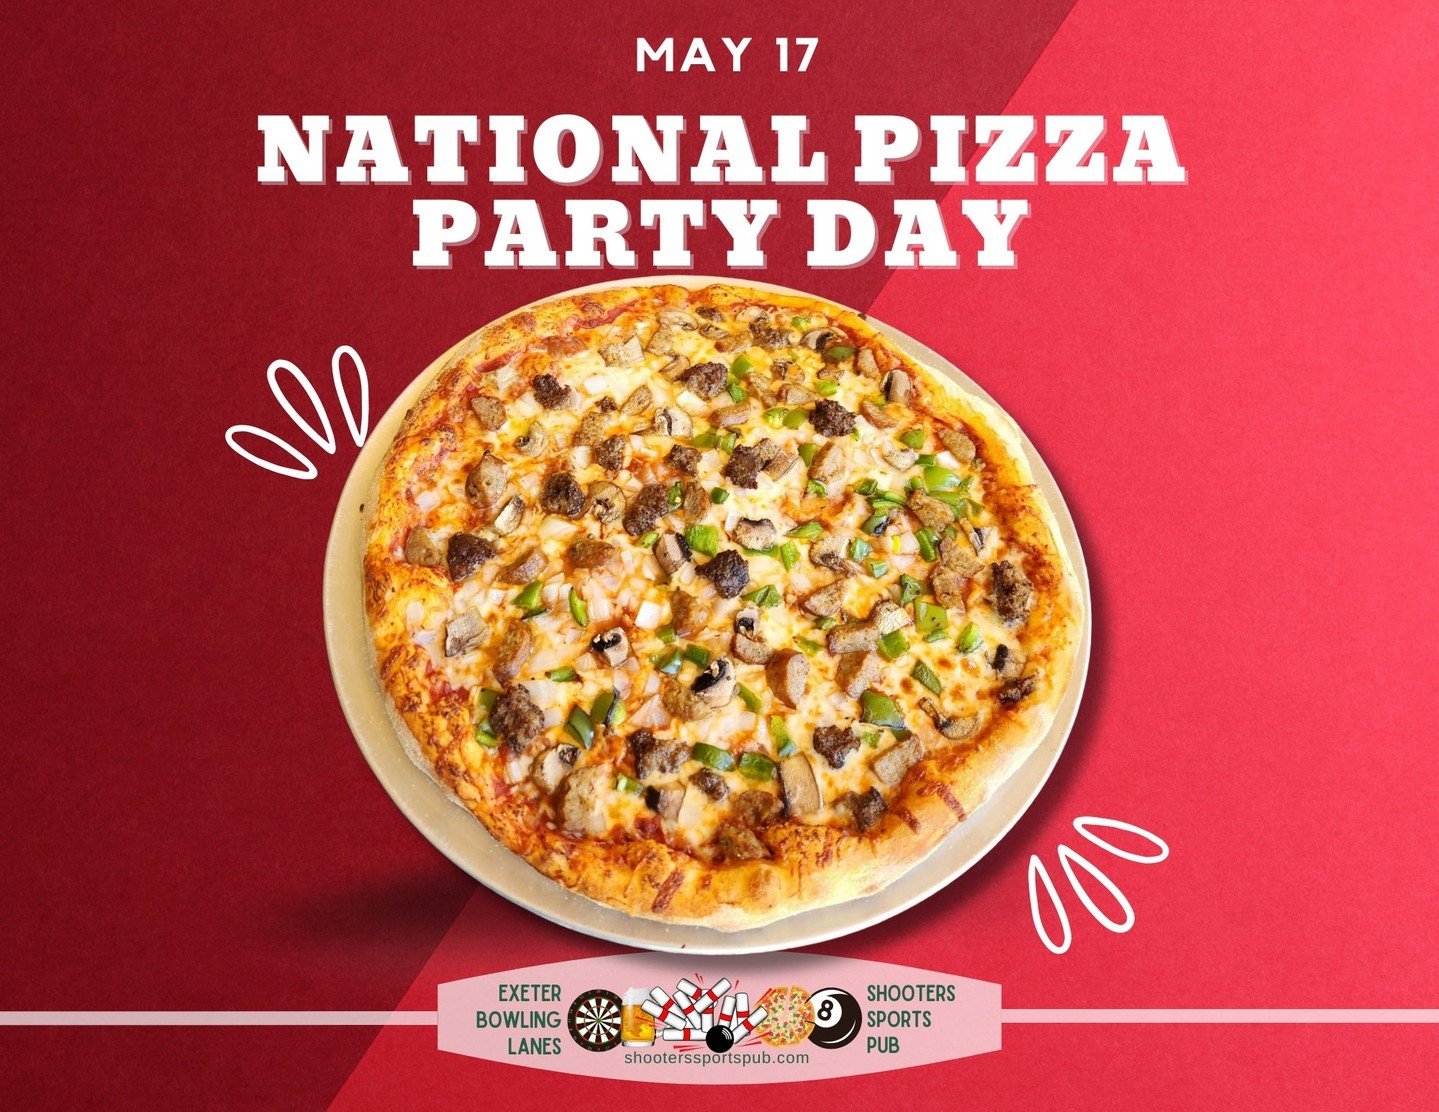 🍕 Celebrate National Pizza Party Day with the cheesiest, most delicious slices in town. Let's pizza 'til we can't pizza no more! #BestPizzaParty